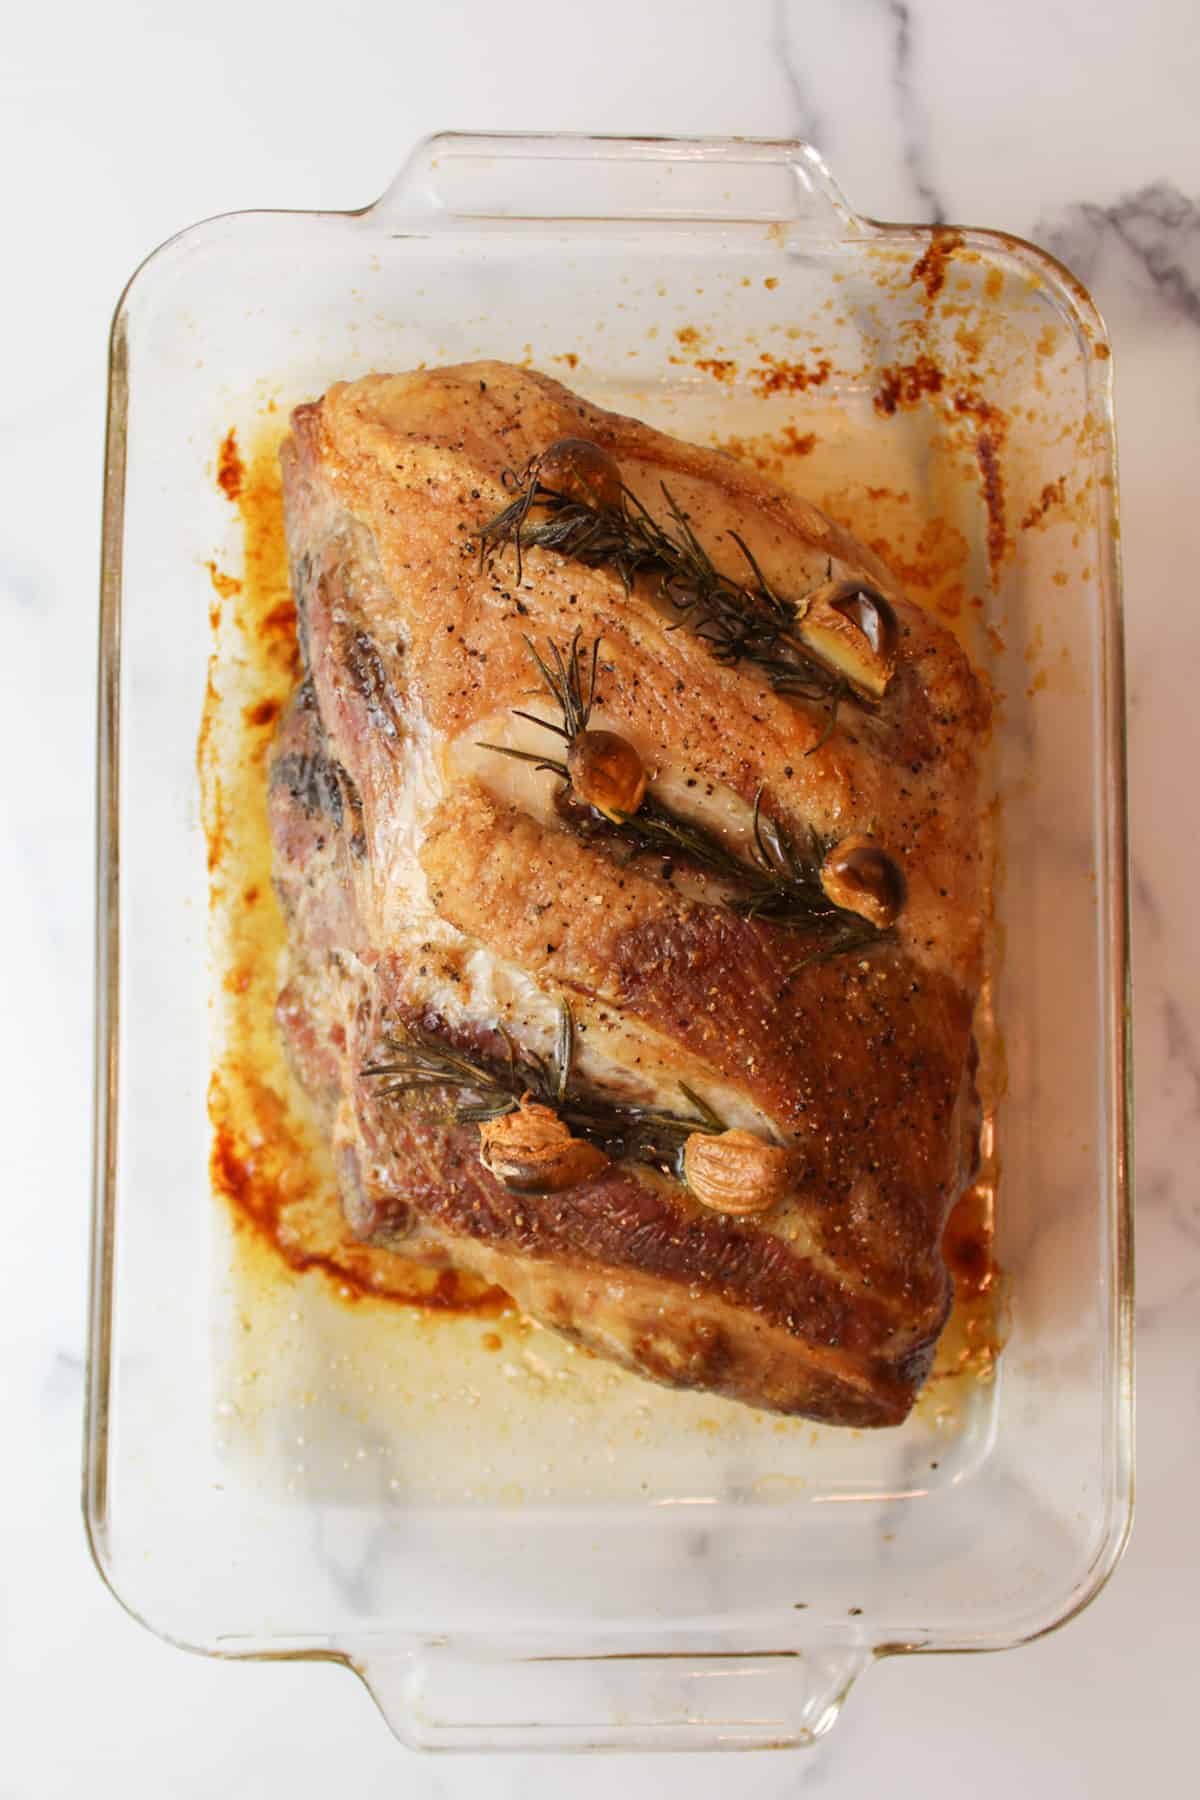 roasted pork shoulder with rosemary and garlic cloves in a glass 9x13 baking dish